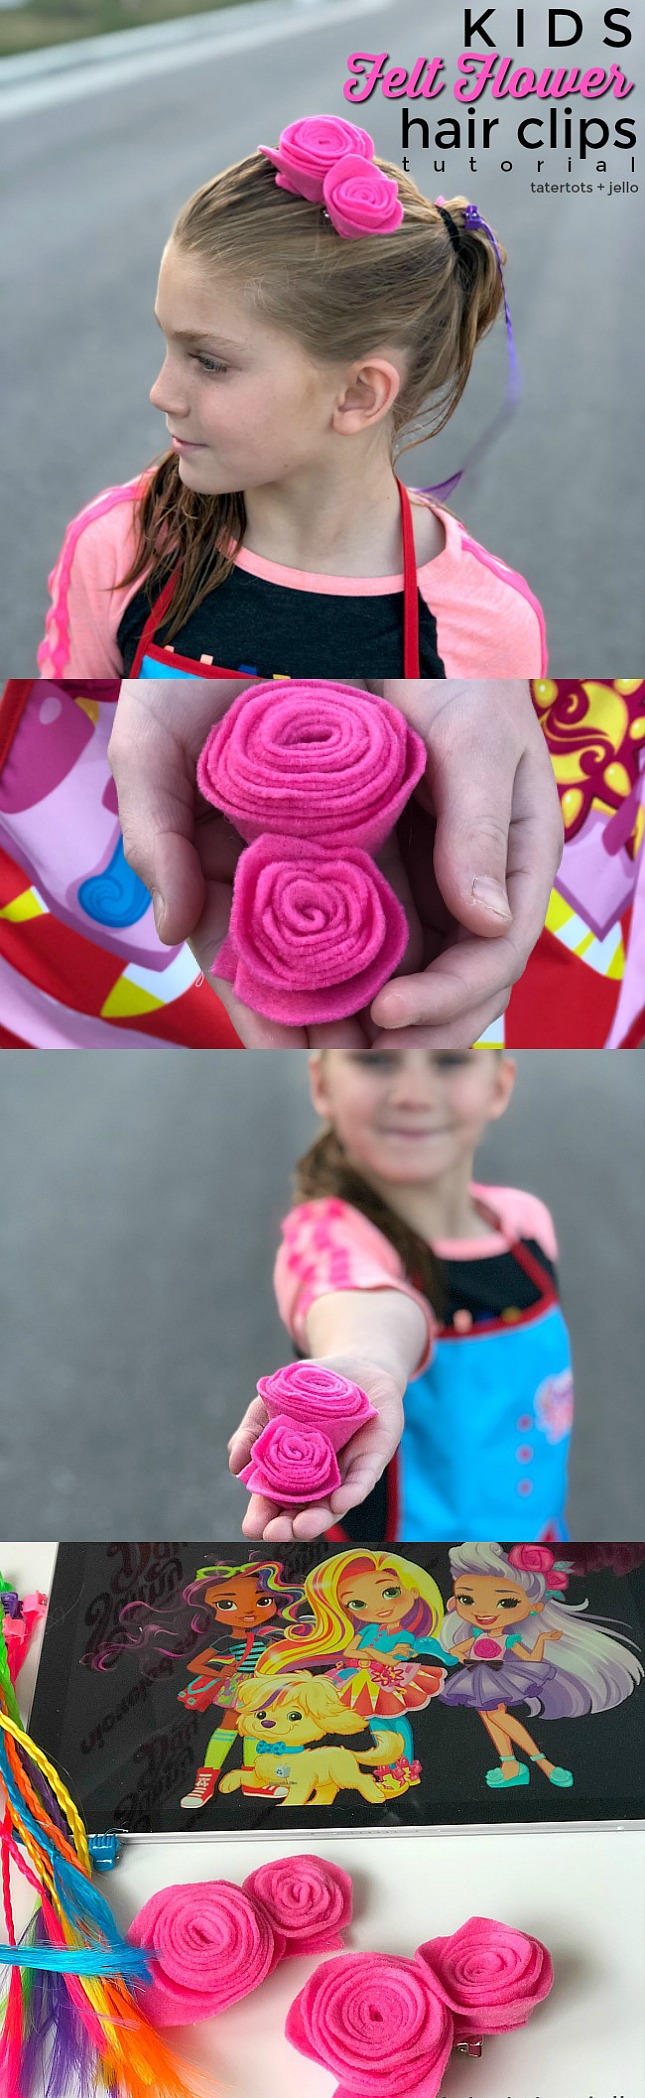 Kids craft Felt Flower Hair Clips. Kids will love making these pretty flower hair clips based on the NickJr Sunny Day animated series. Watch Sunny Day weekdays on Nickelodeon! #ad #nickelodeon #nickjr #sunnyday #hairclips #feltflowers #kidscraft #hairtutorial #craftidea 